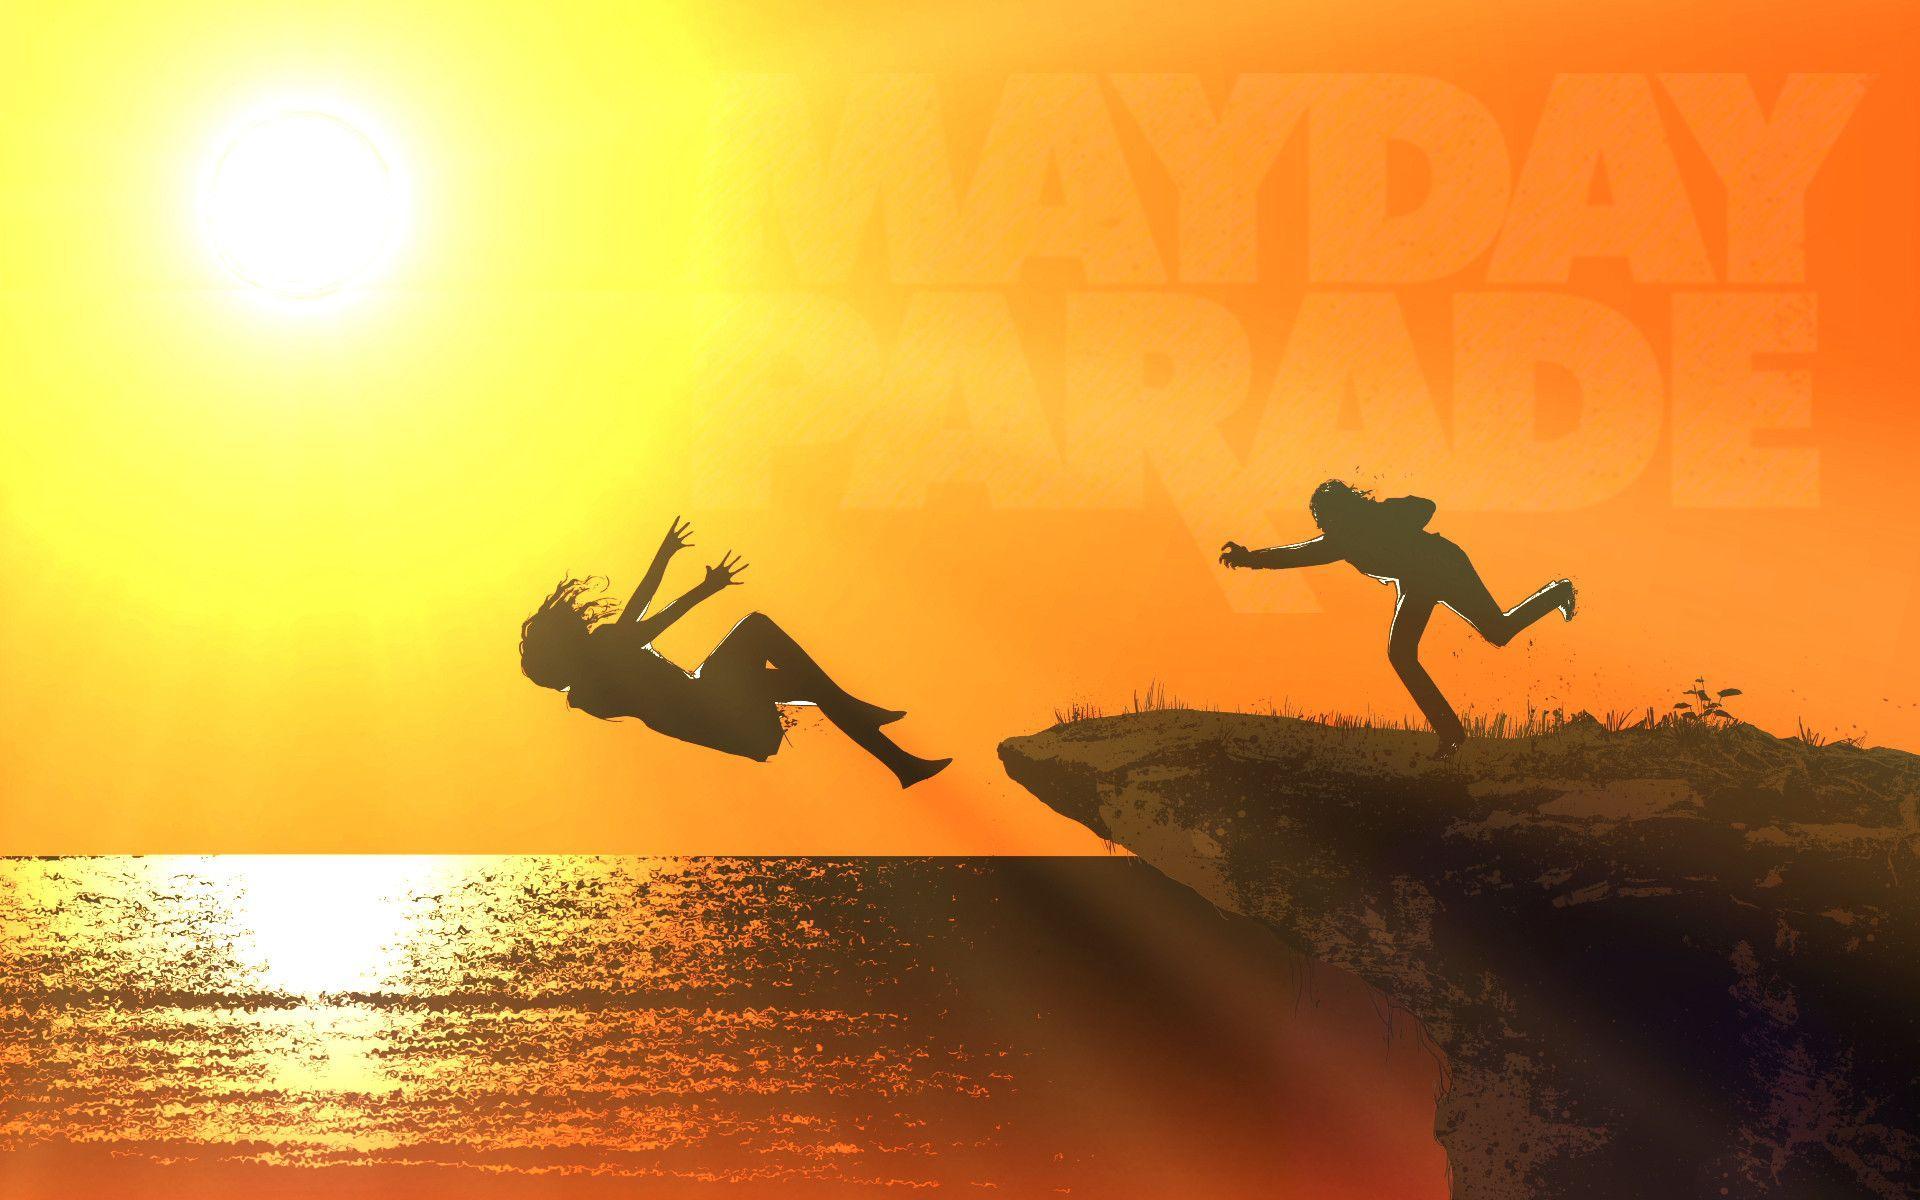 My current desktop background (for Mayday Parade fans)